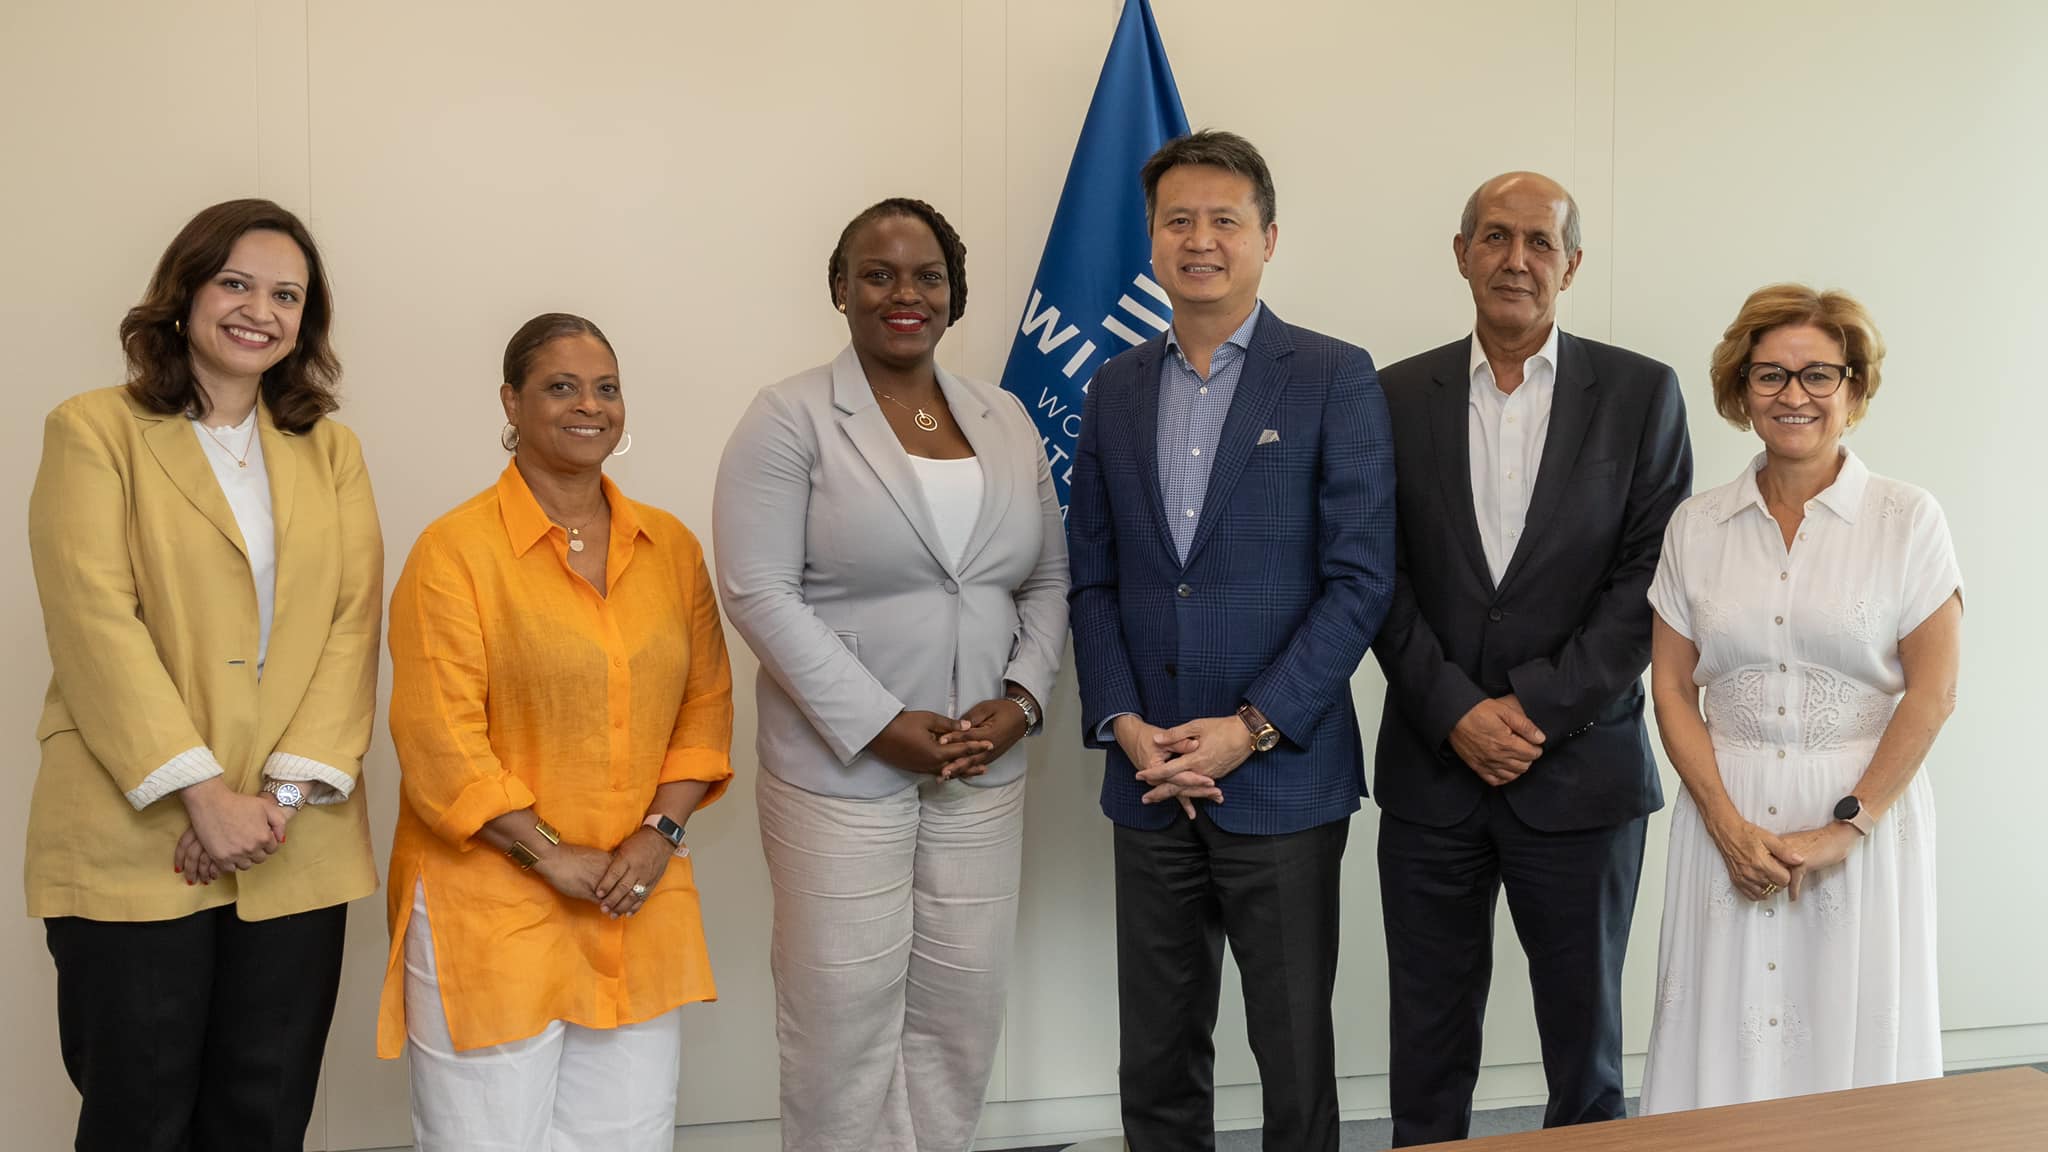 Registrar Jihan Williams-Knight met with high level officials at the WIPO